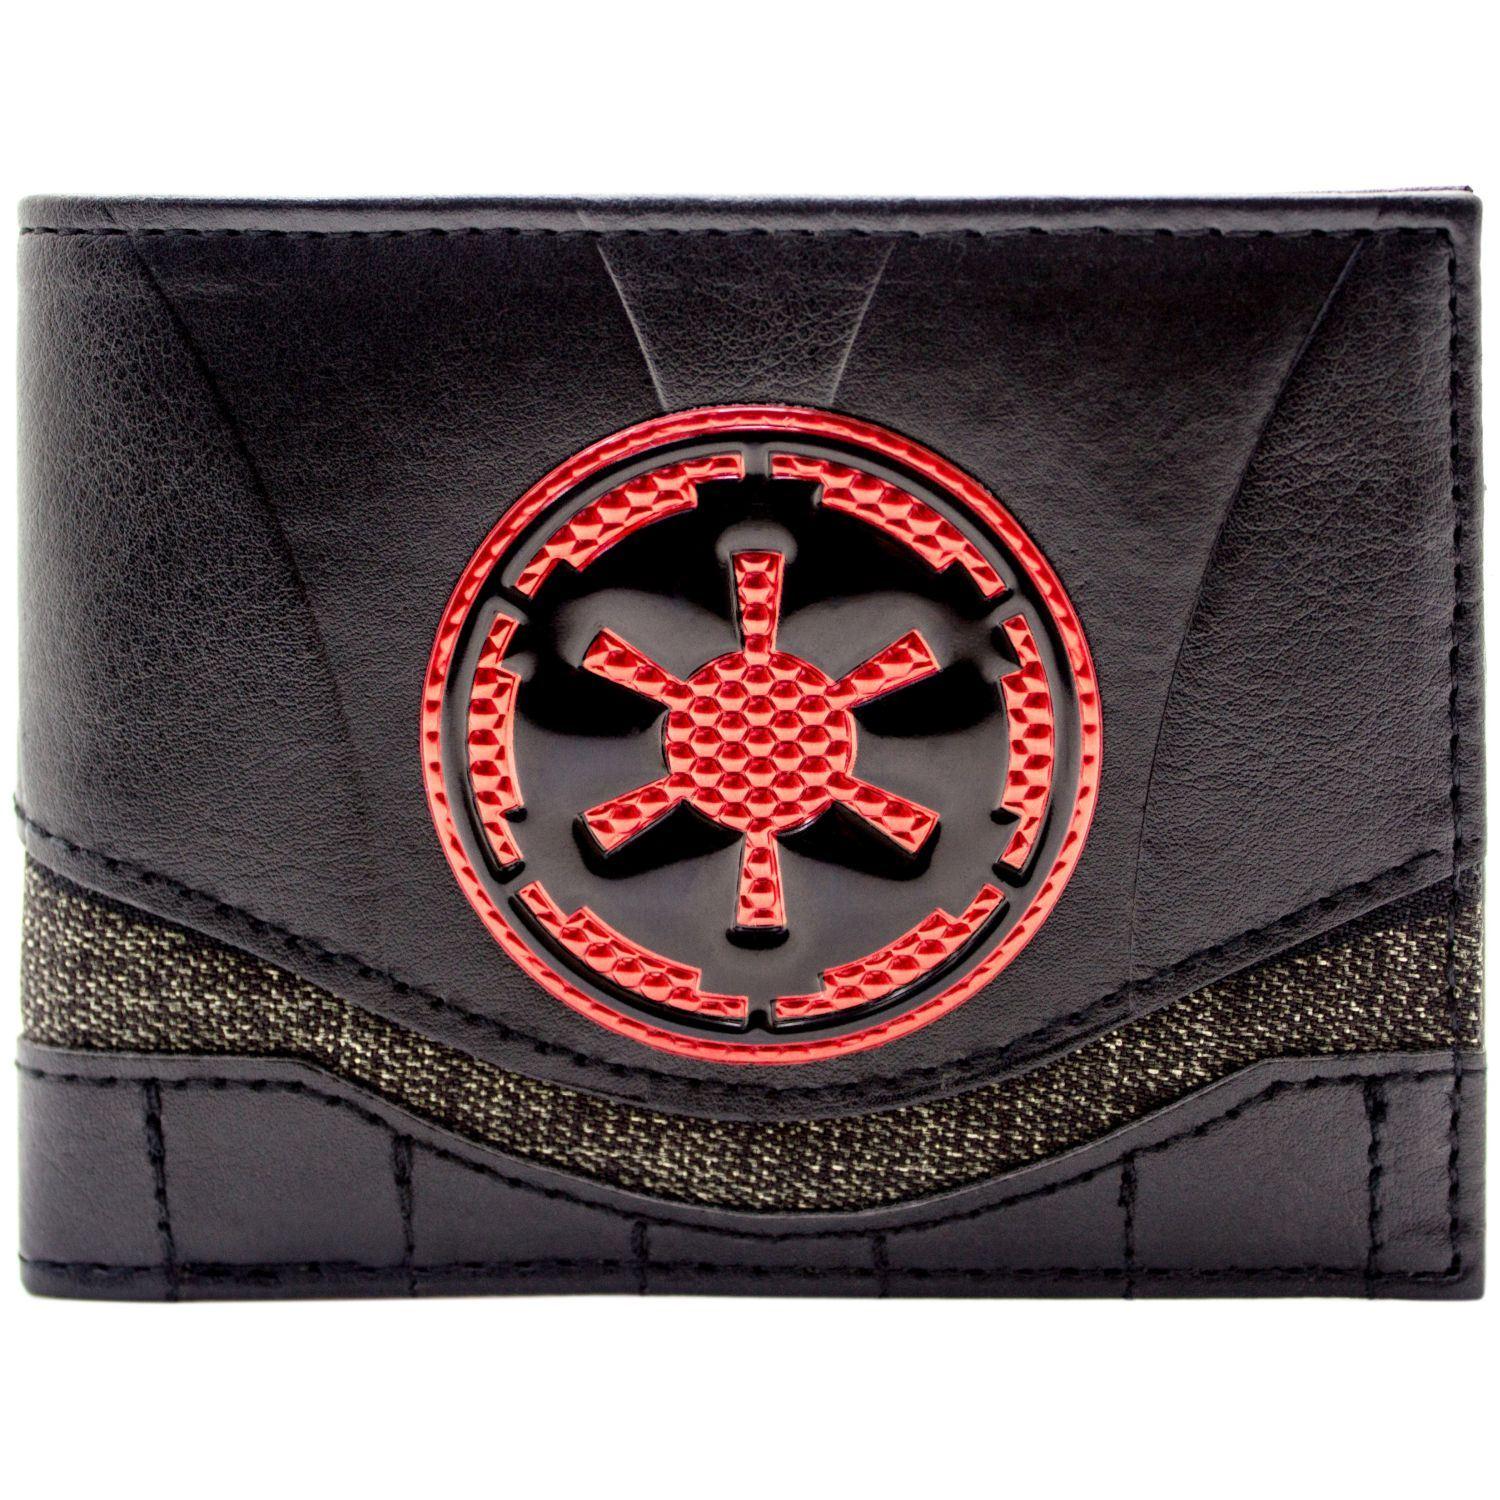 Imperial Logo - NEW OFFICIAL STAR WARS RED IMPERIAL LOGO RED ID & CARD BI FOLD